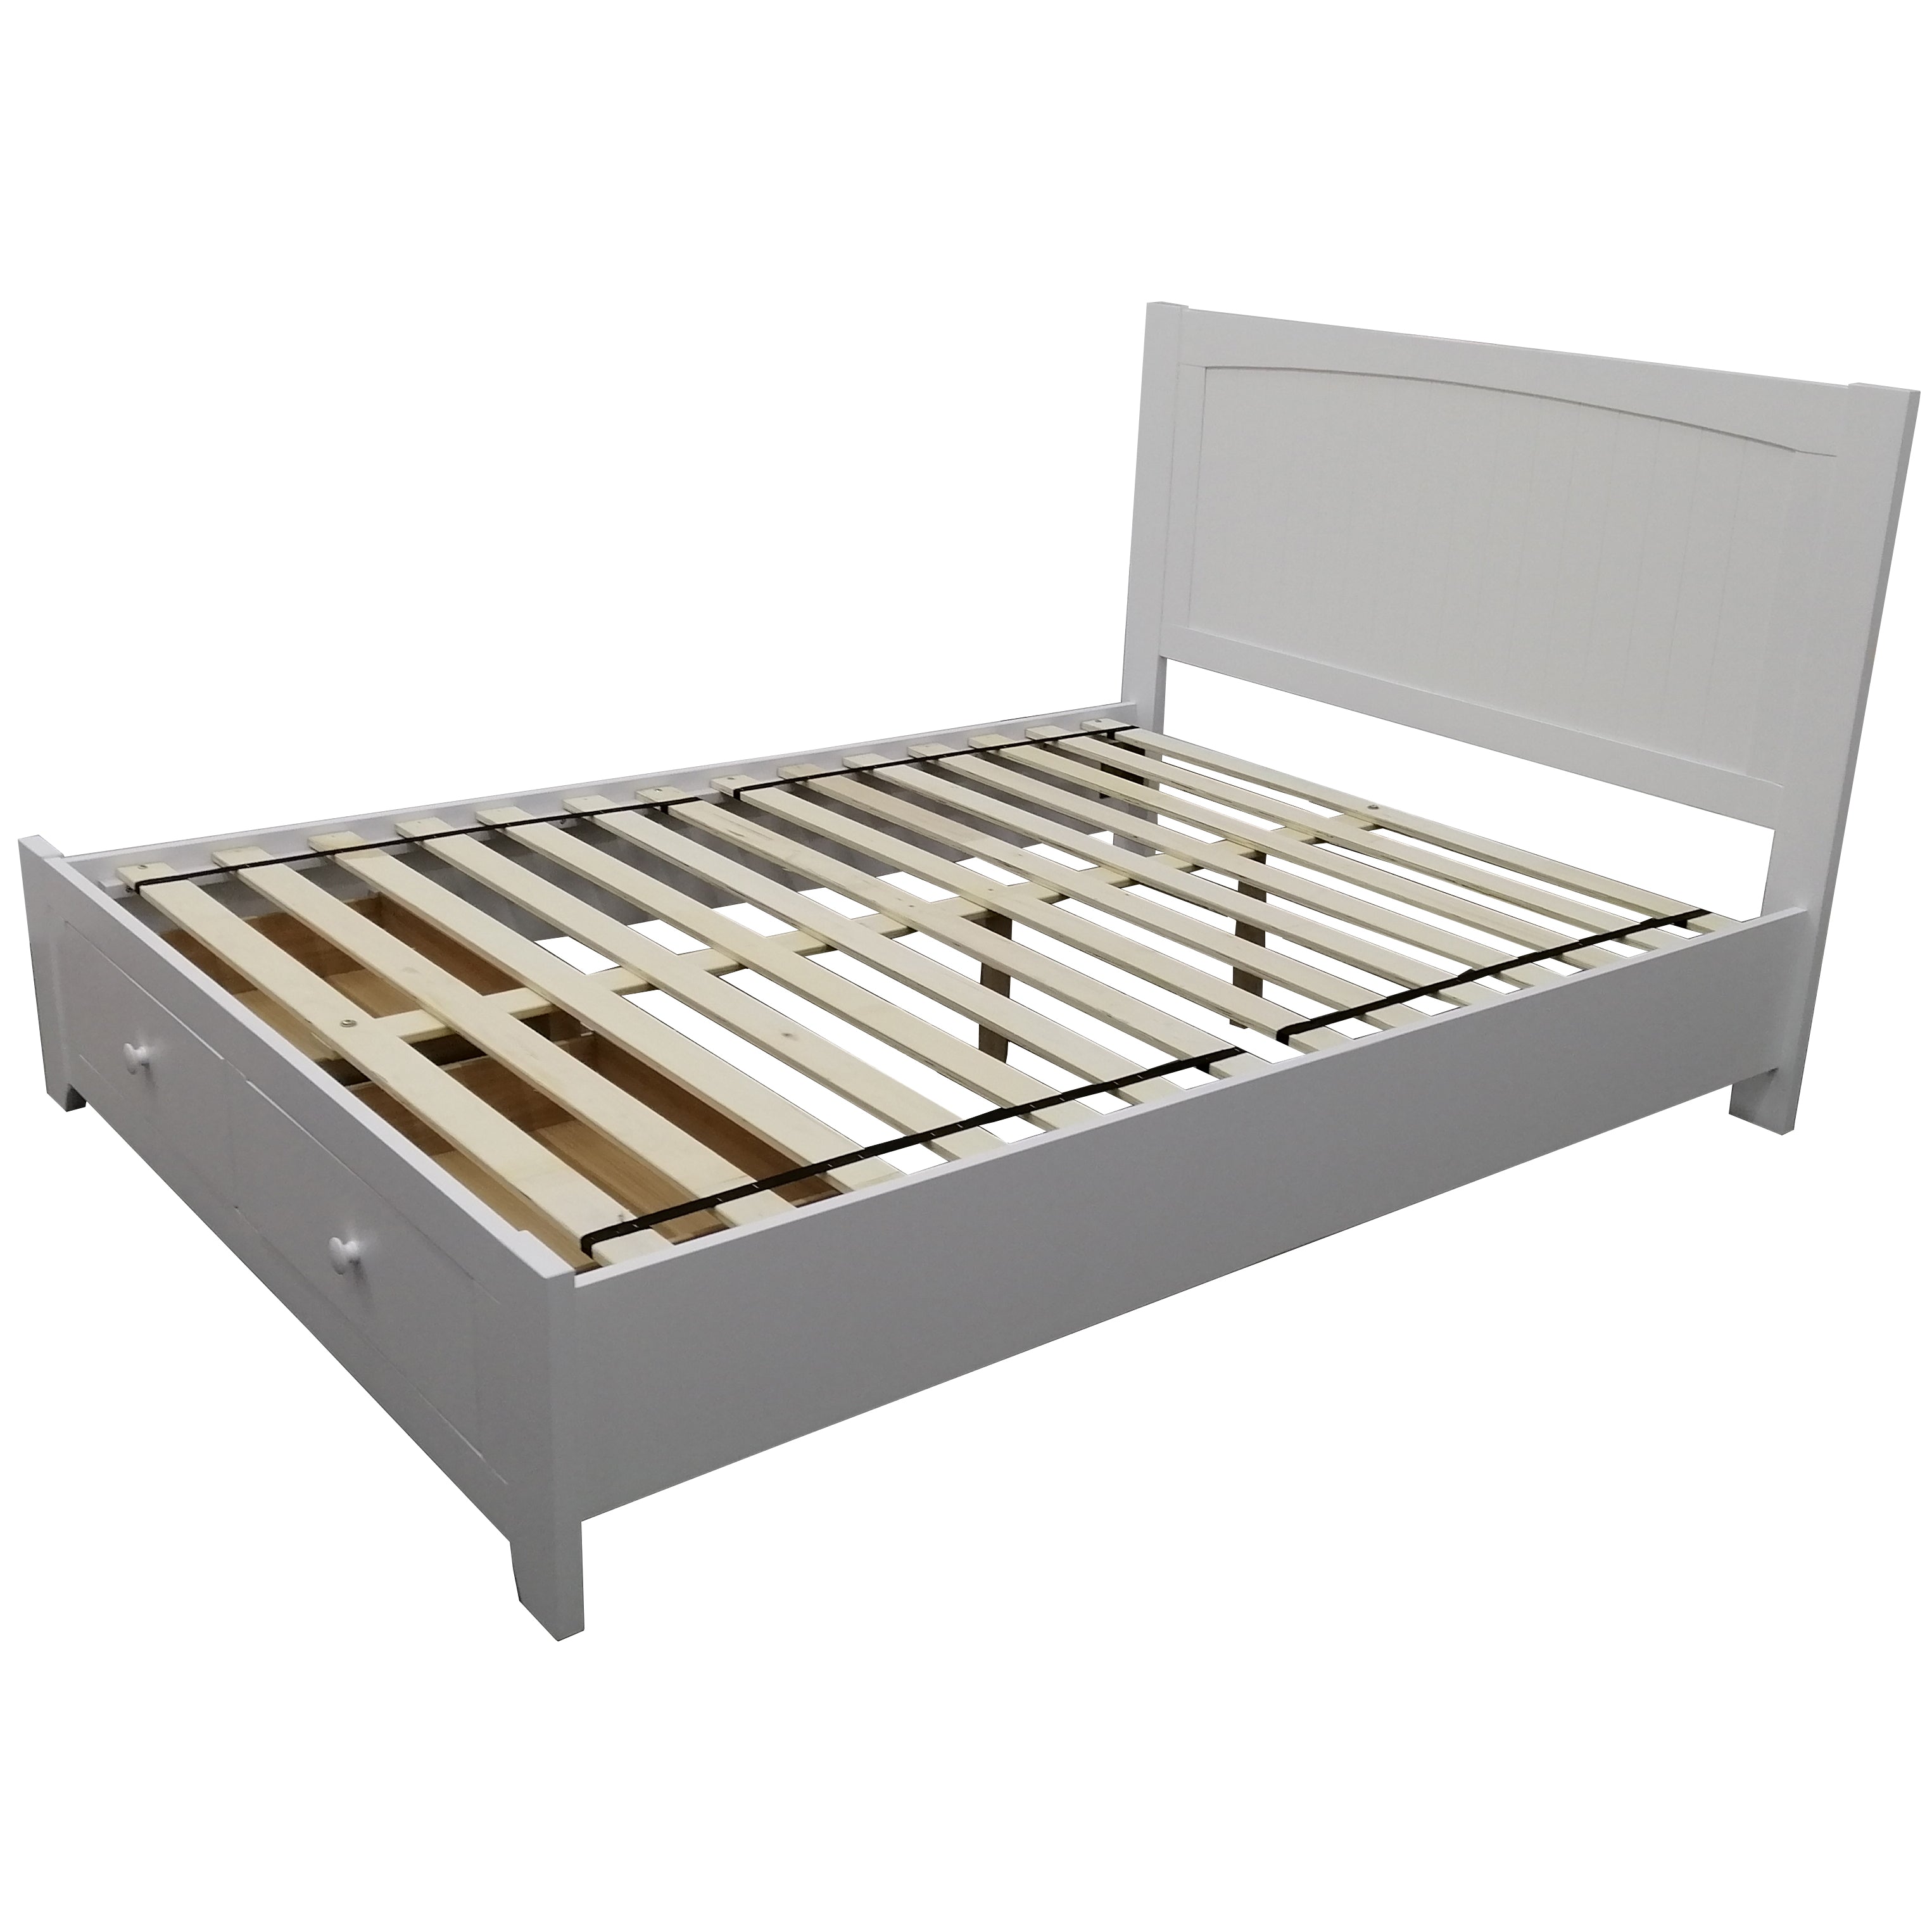 Wisteria Bed Frame Double Size Mattress Base Storage Drawer Timber Wood - White Deals499